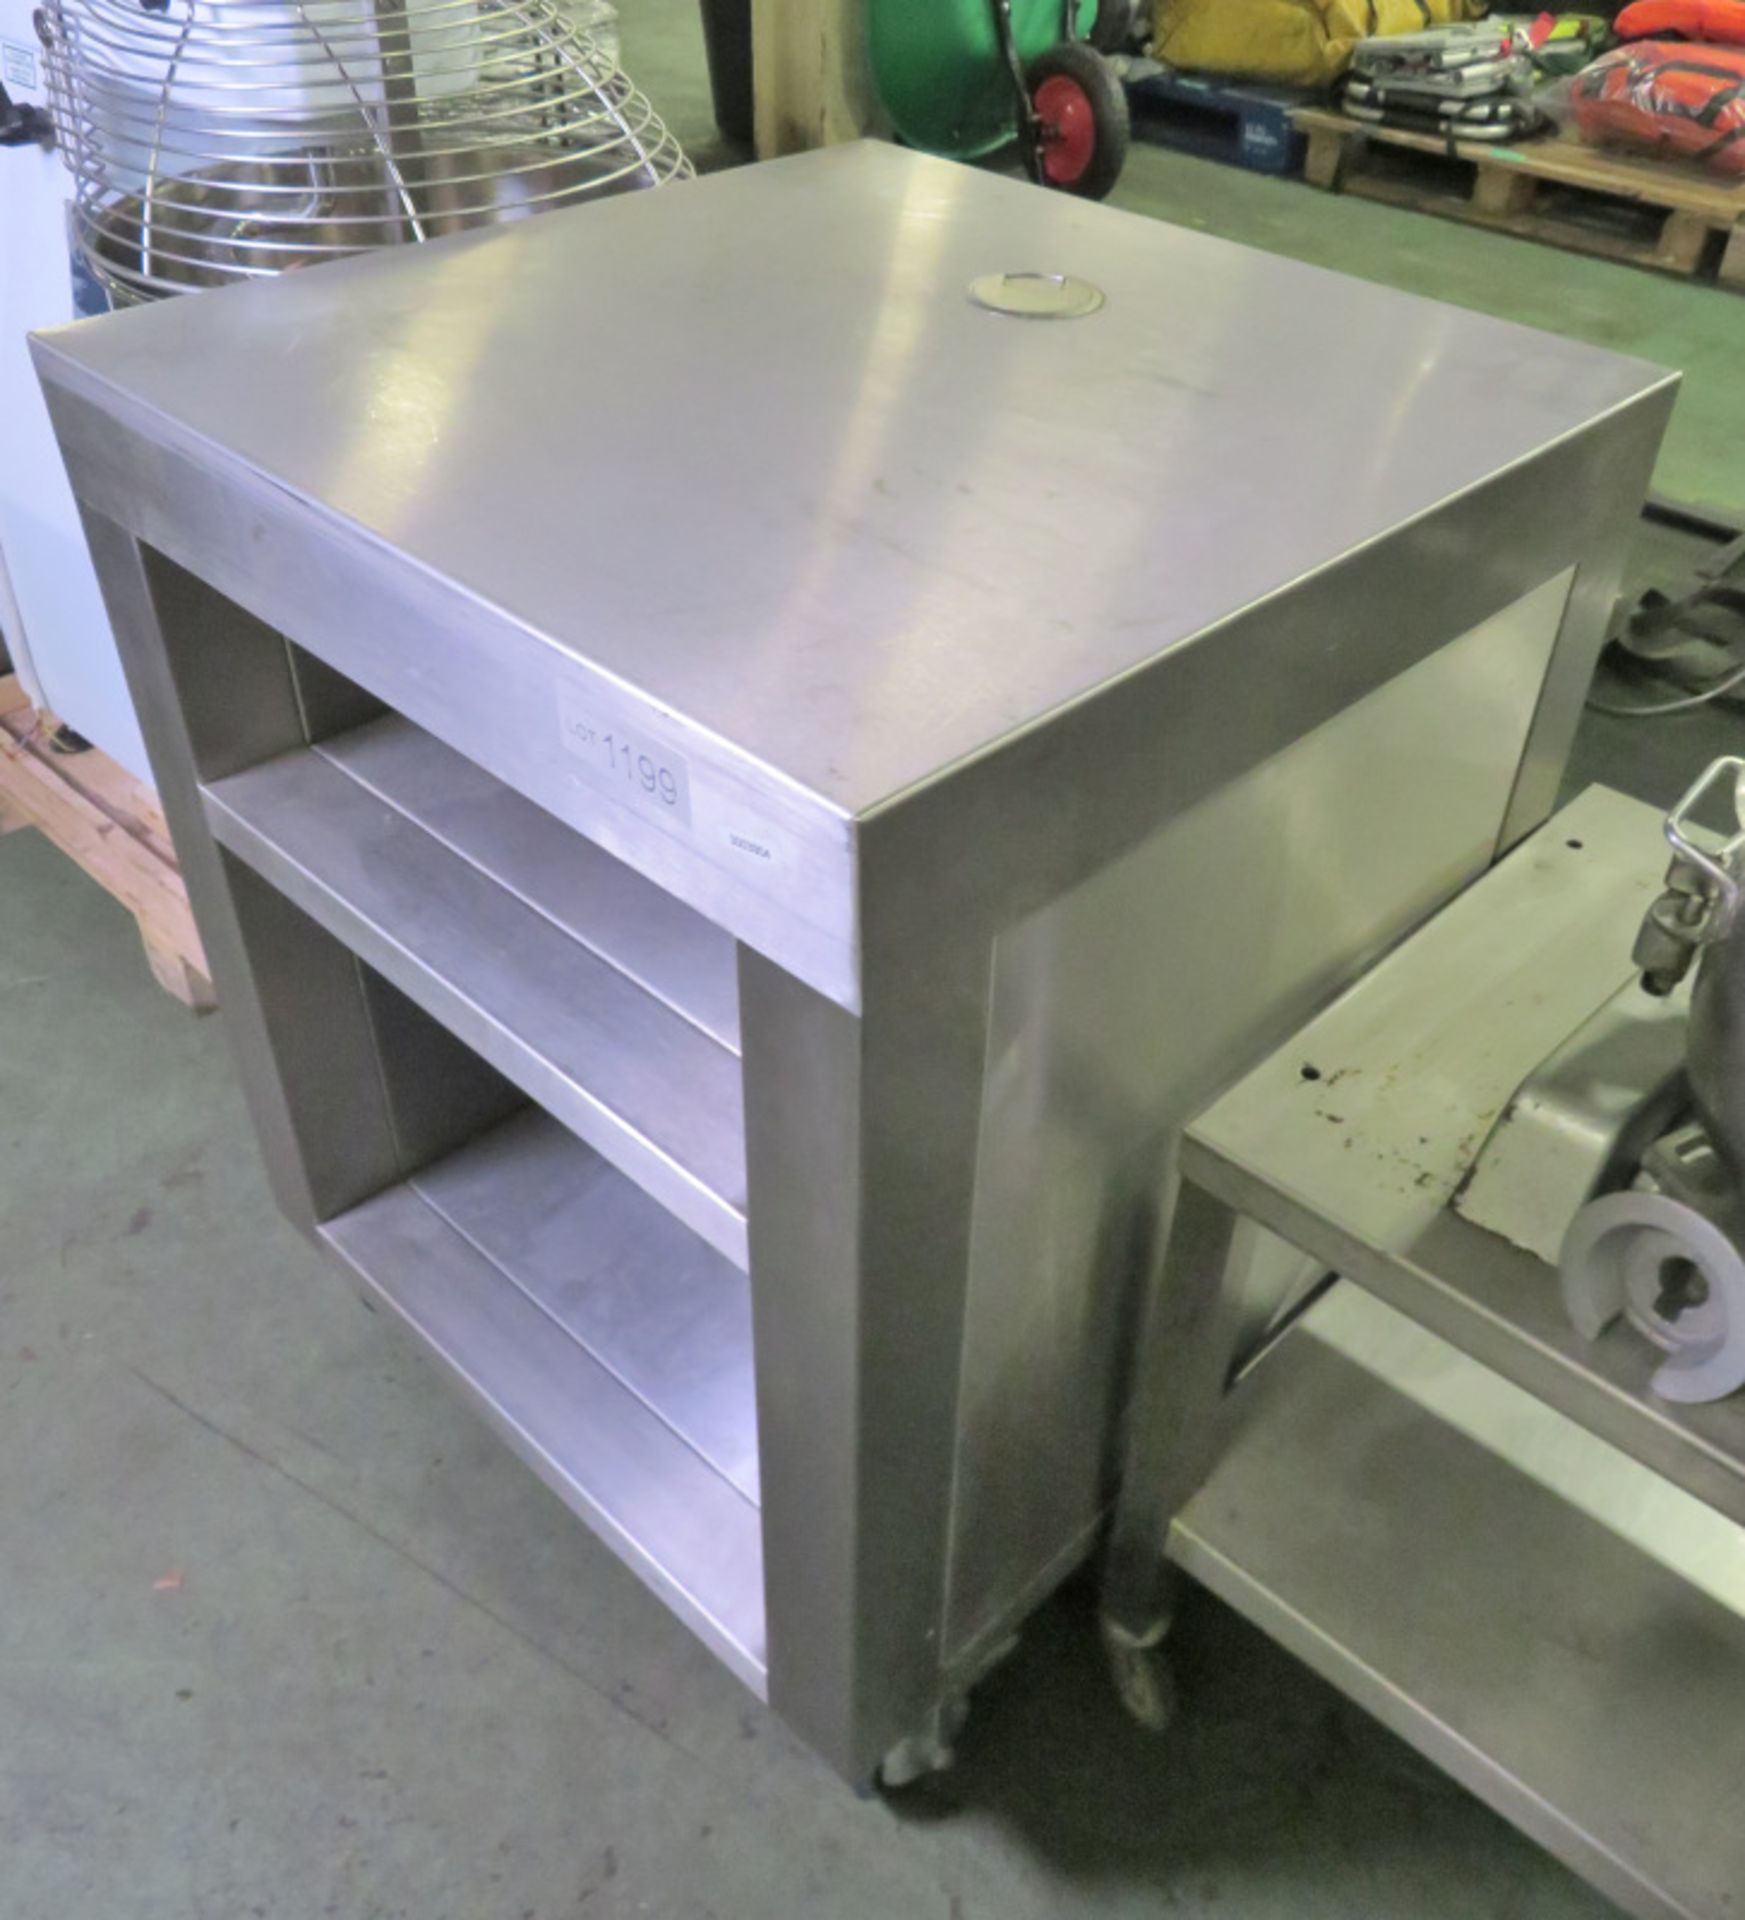 Stainless Steel Mobile Counter L 700mm x W 700mm x H 900mm - Image 2 of 3